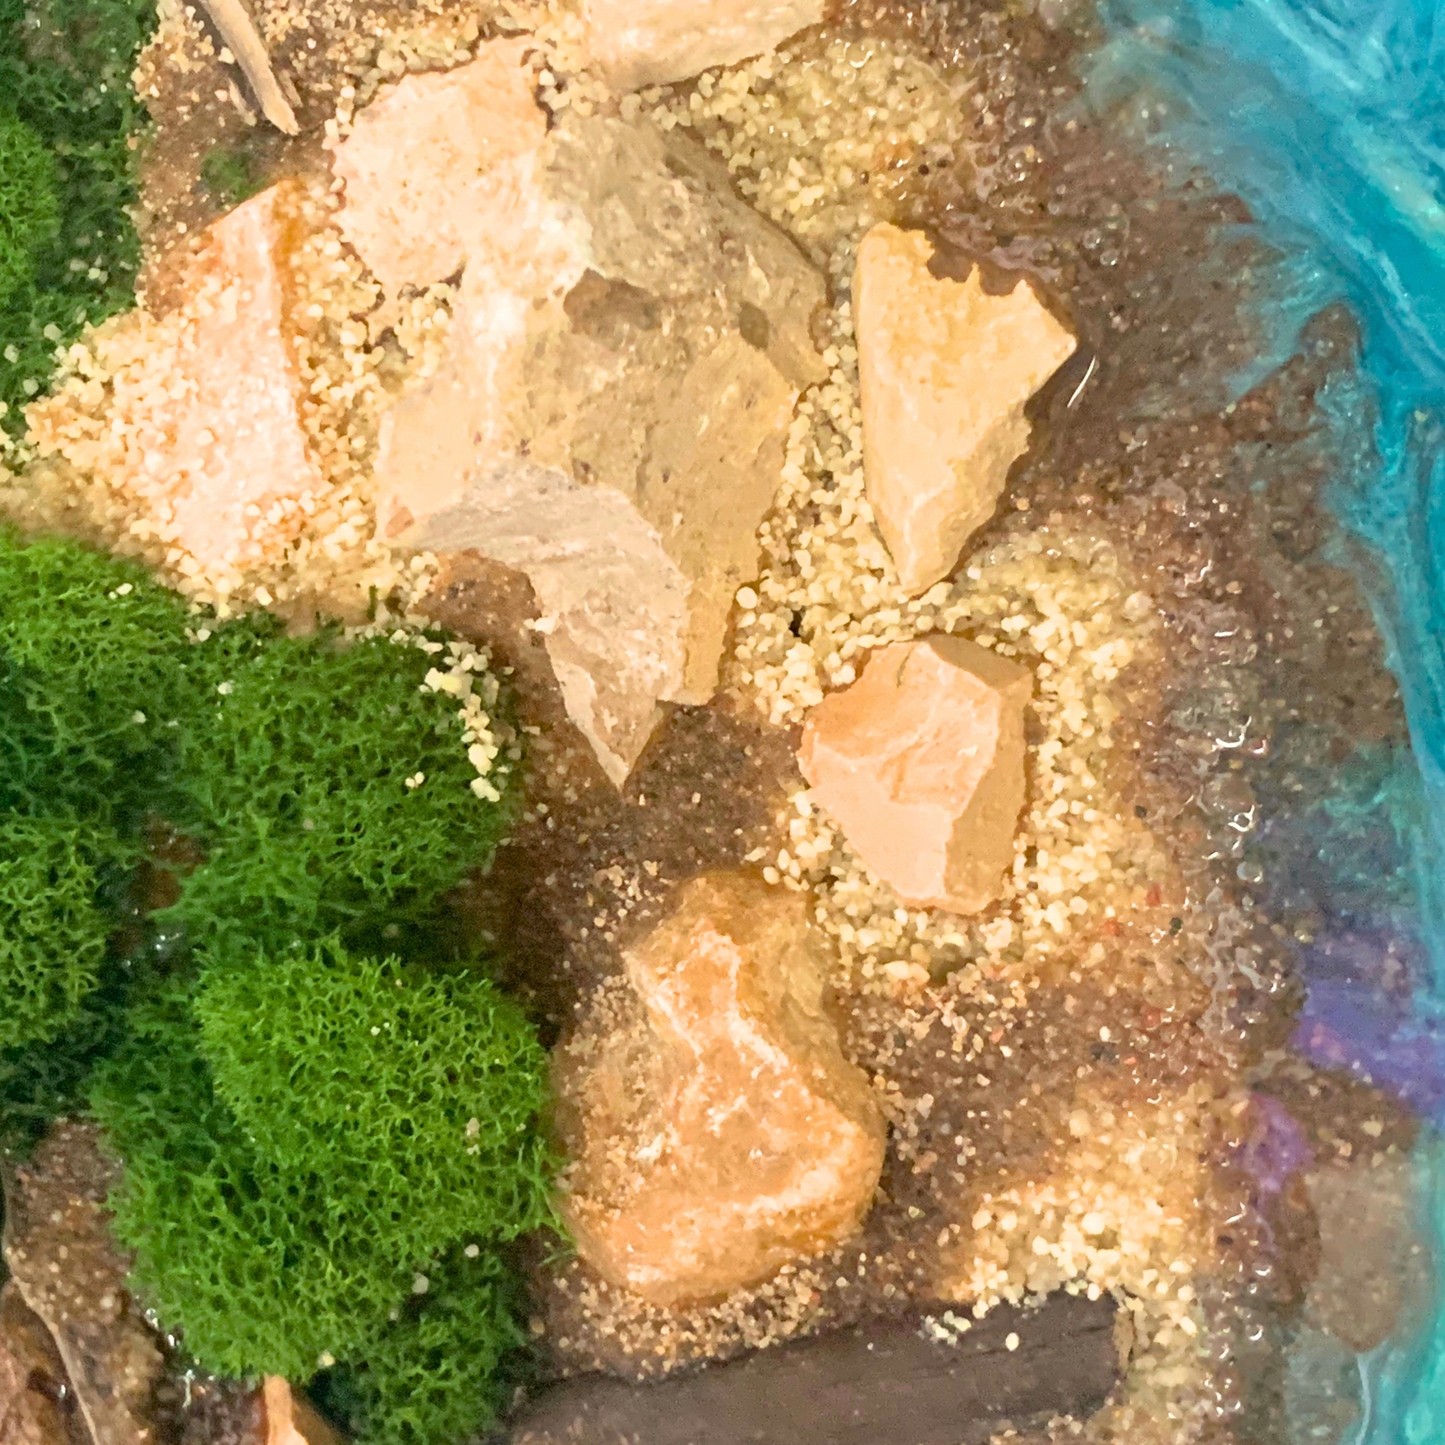 "ISLAND ESCAPE" Modern Resin Ocean Art with Real Sand, Moss, and Shells